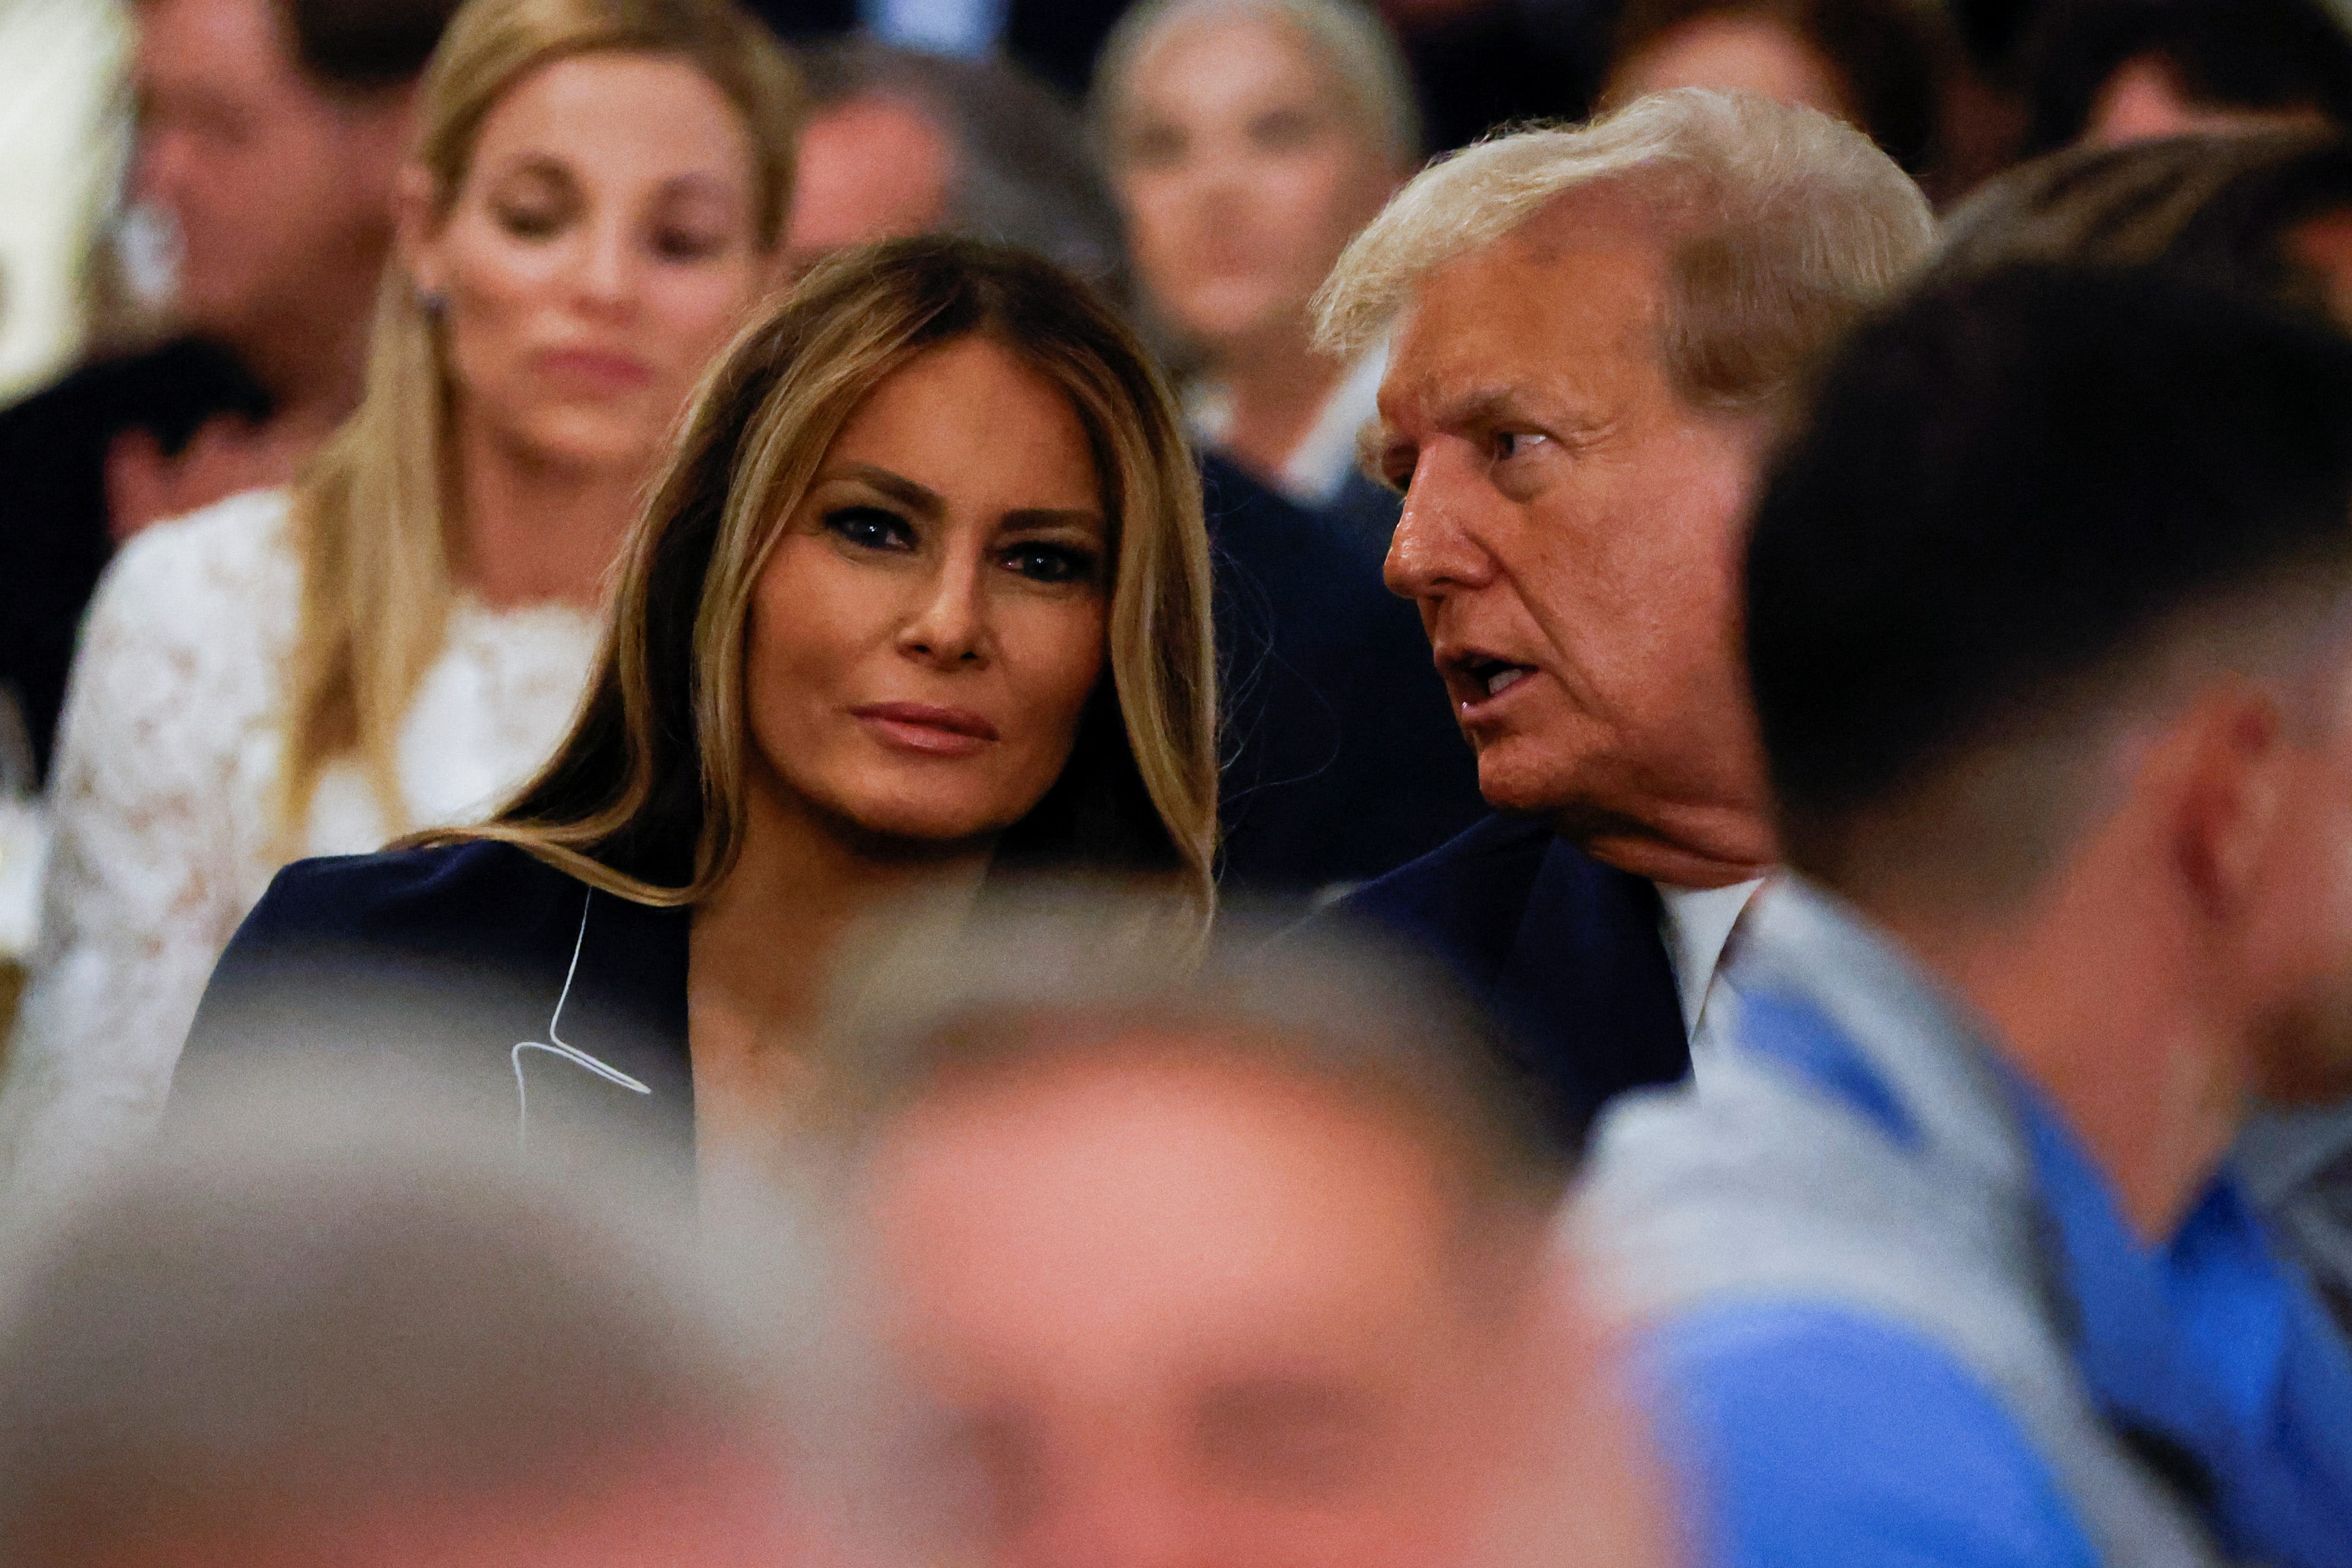 Melania Trump issues powerful statement after assassination attempt